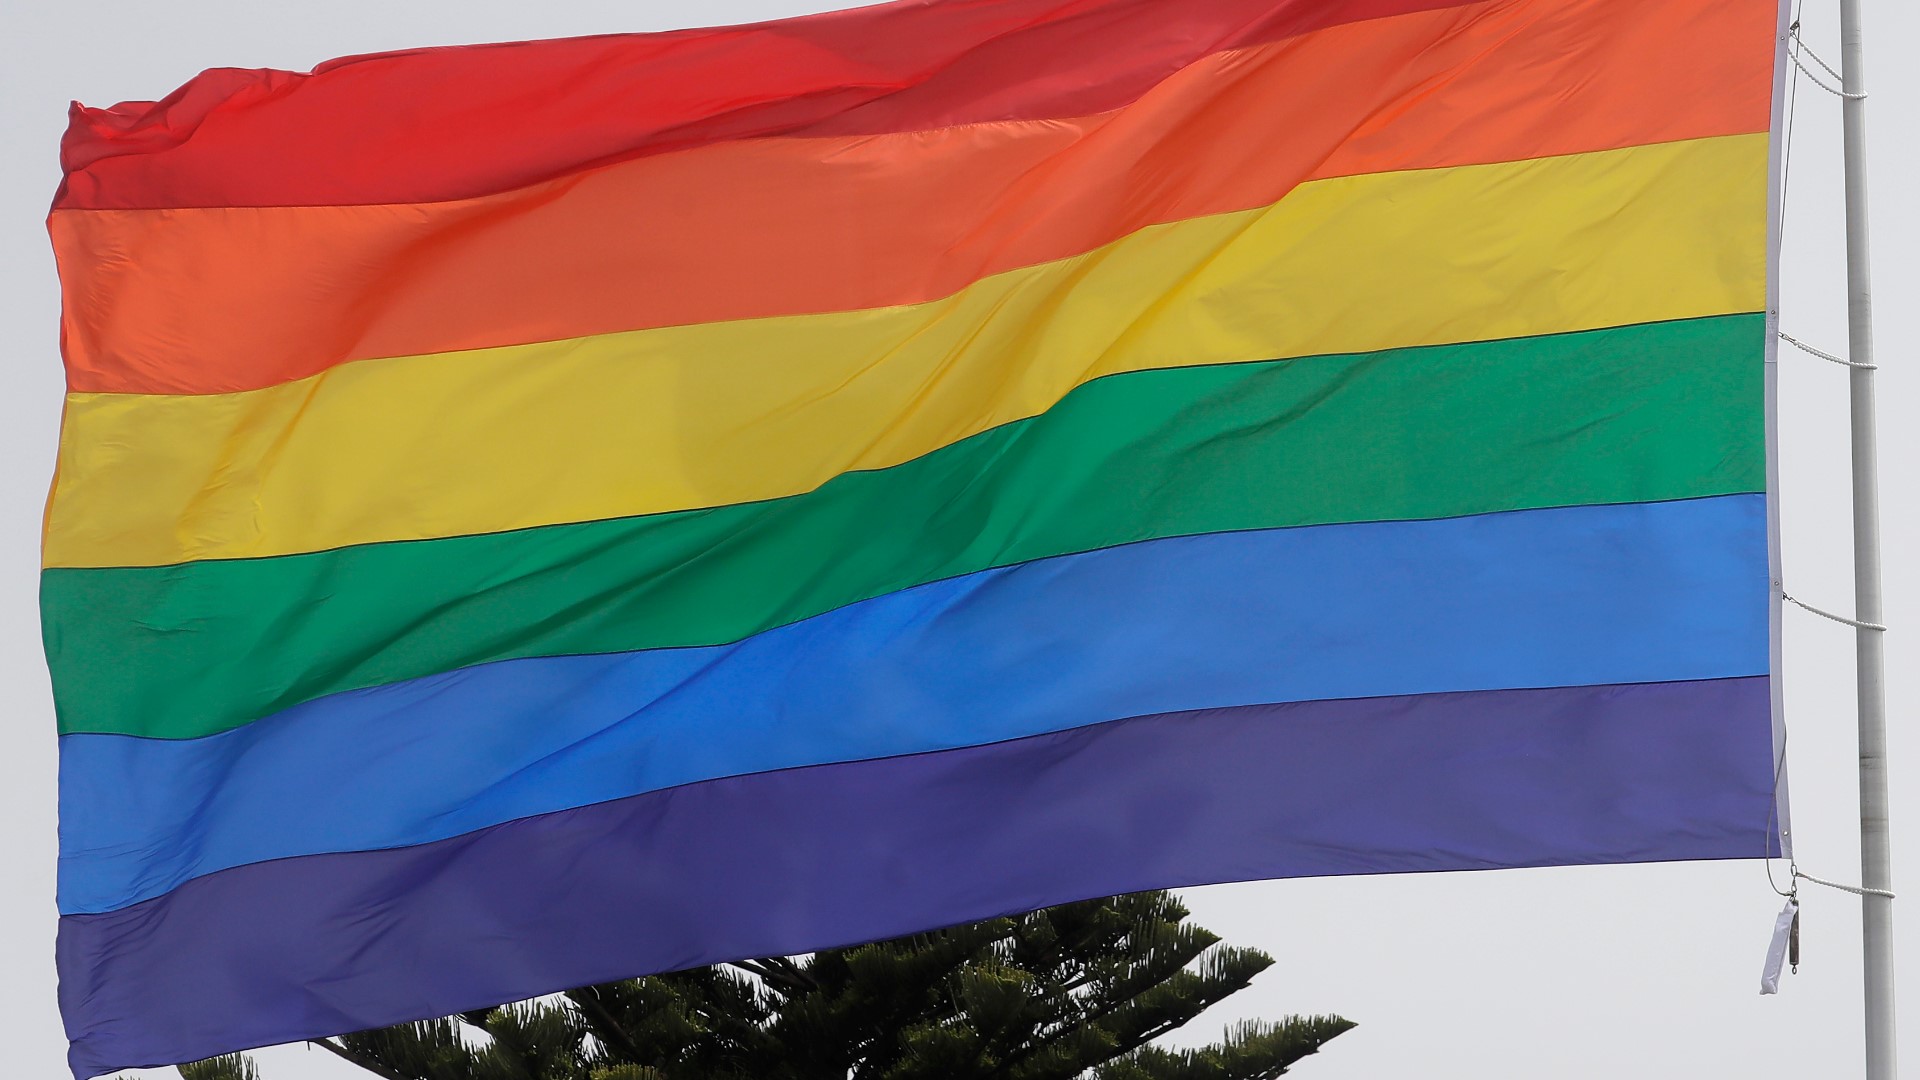 The Holland City Council approved expanding the city's anti-discrimination ordinance to include protections for sexual orientation and gender identity.